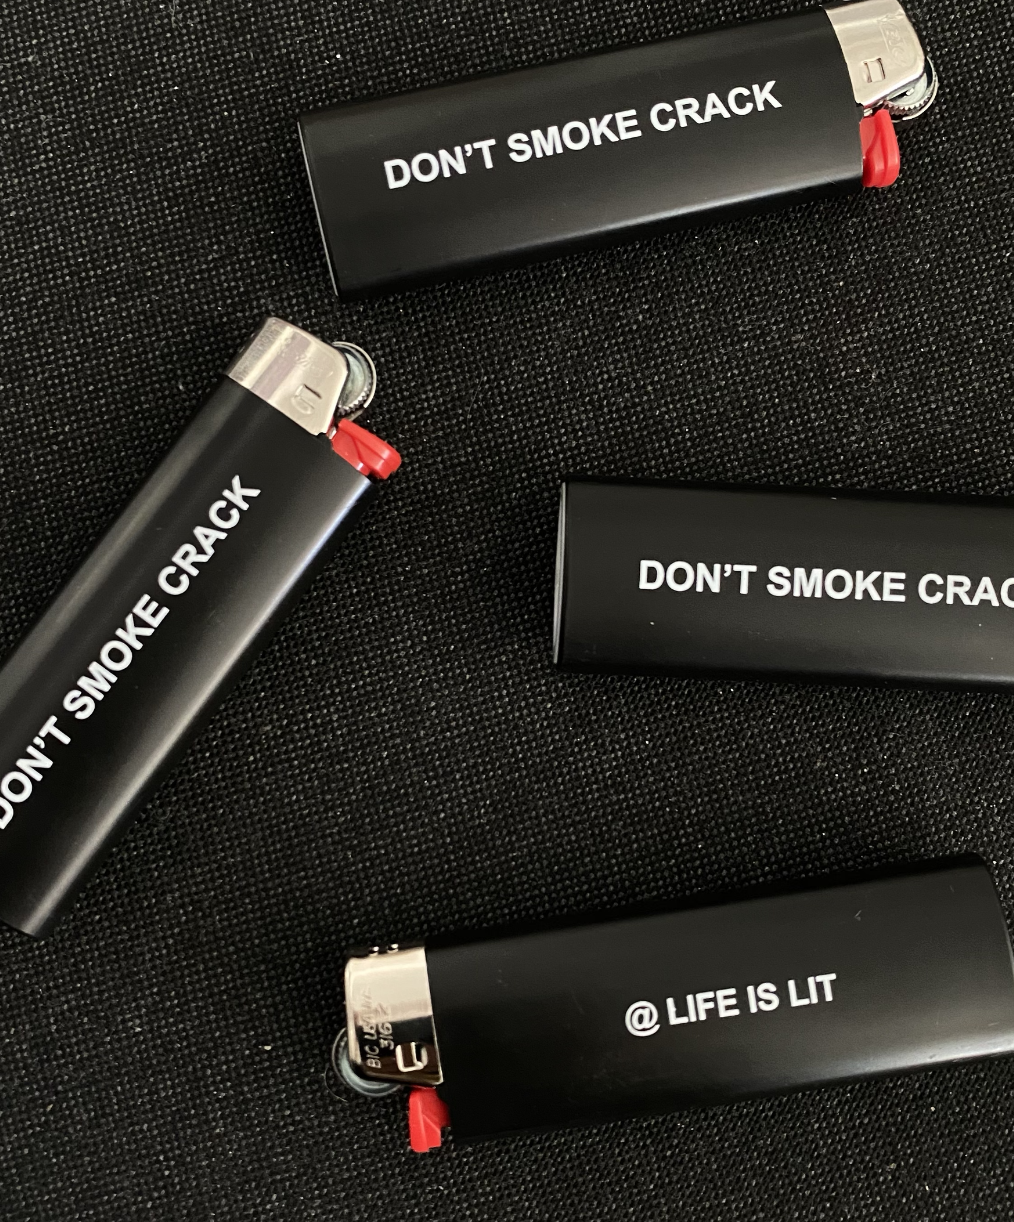 "Don't Smoke Crack" Lighters by White Market